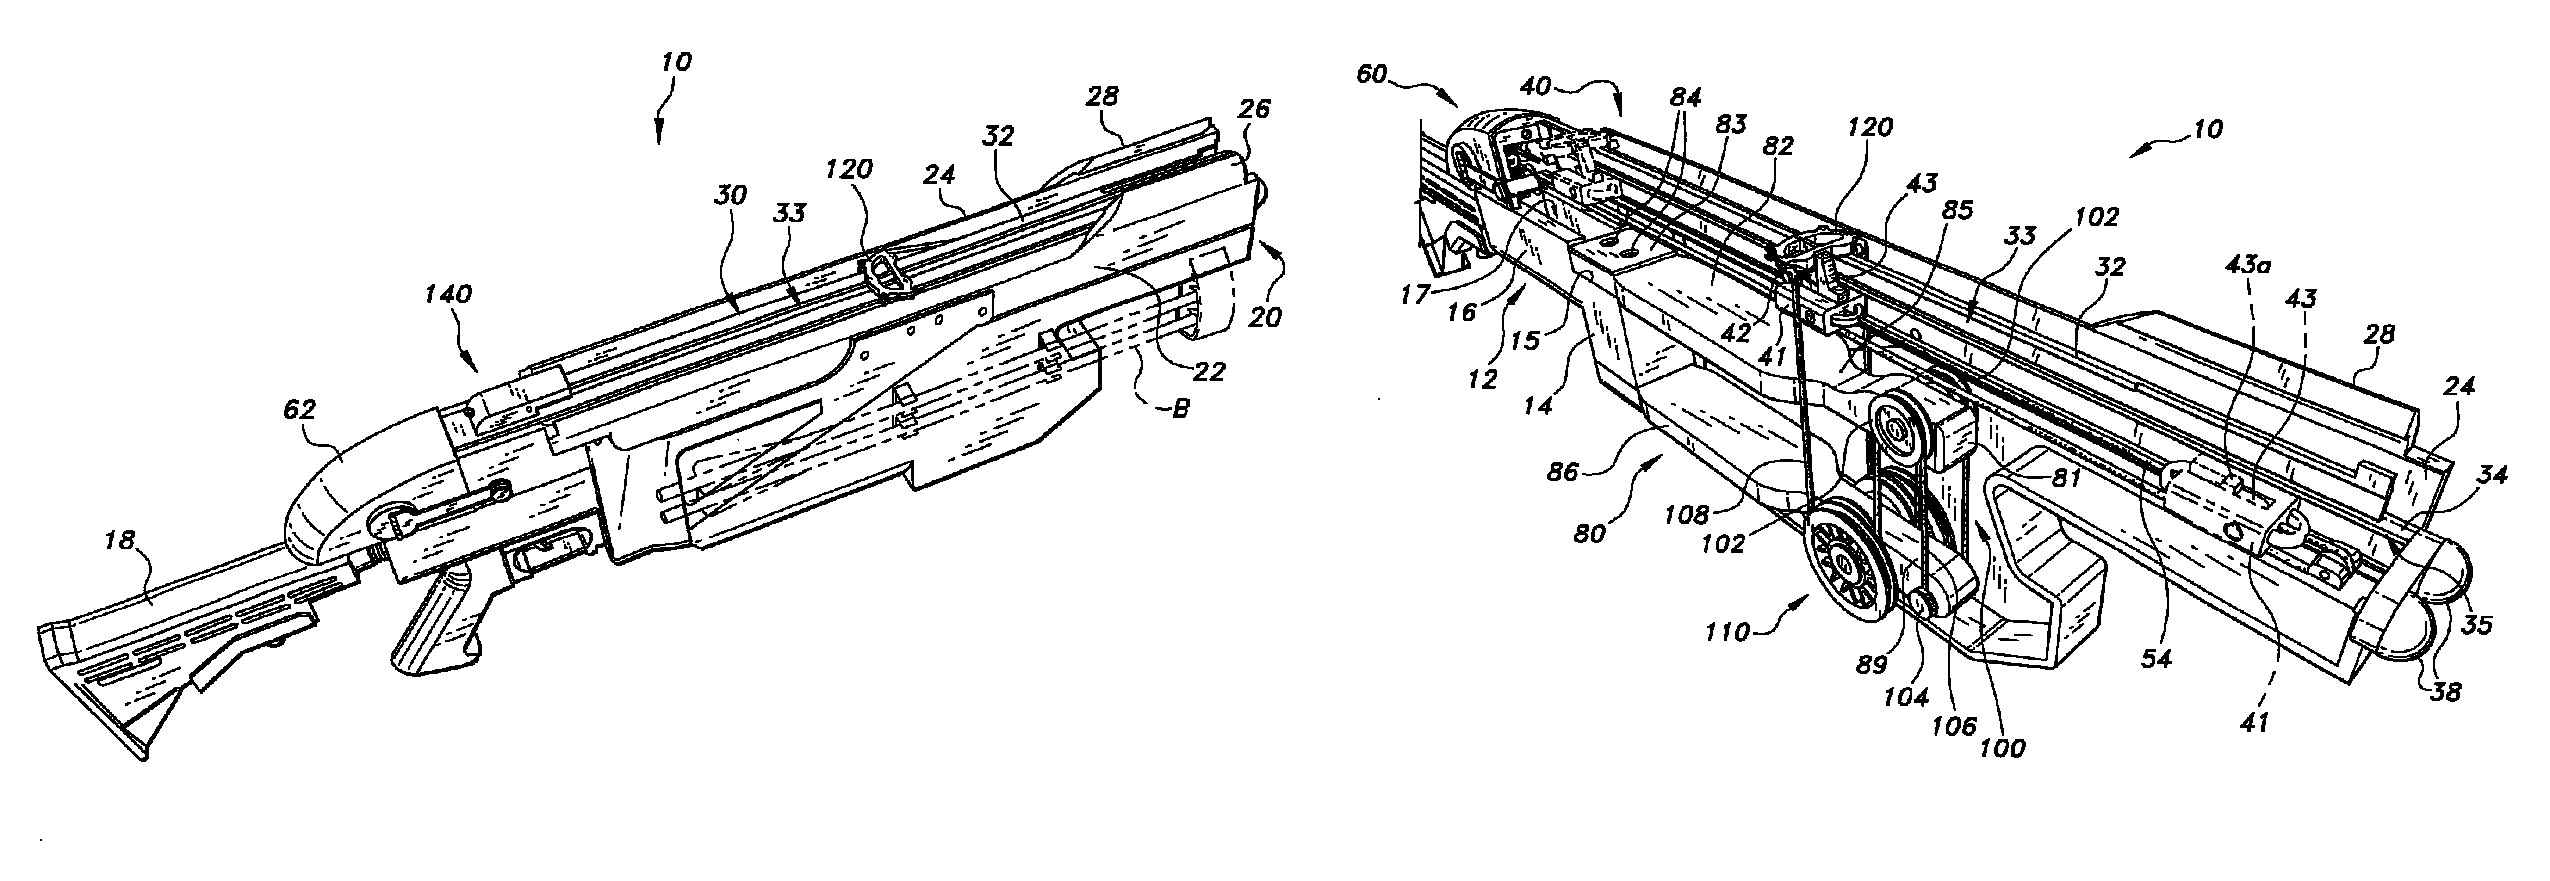 Projectile launcher with internal bow